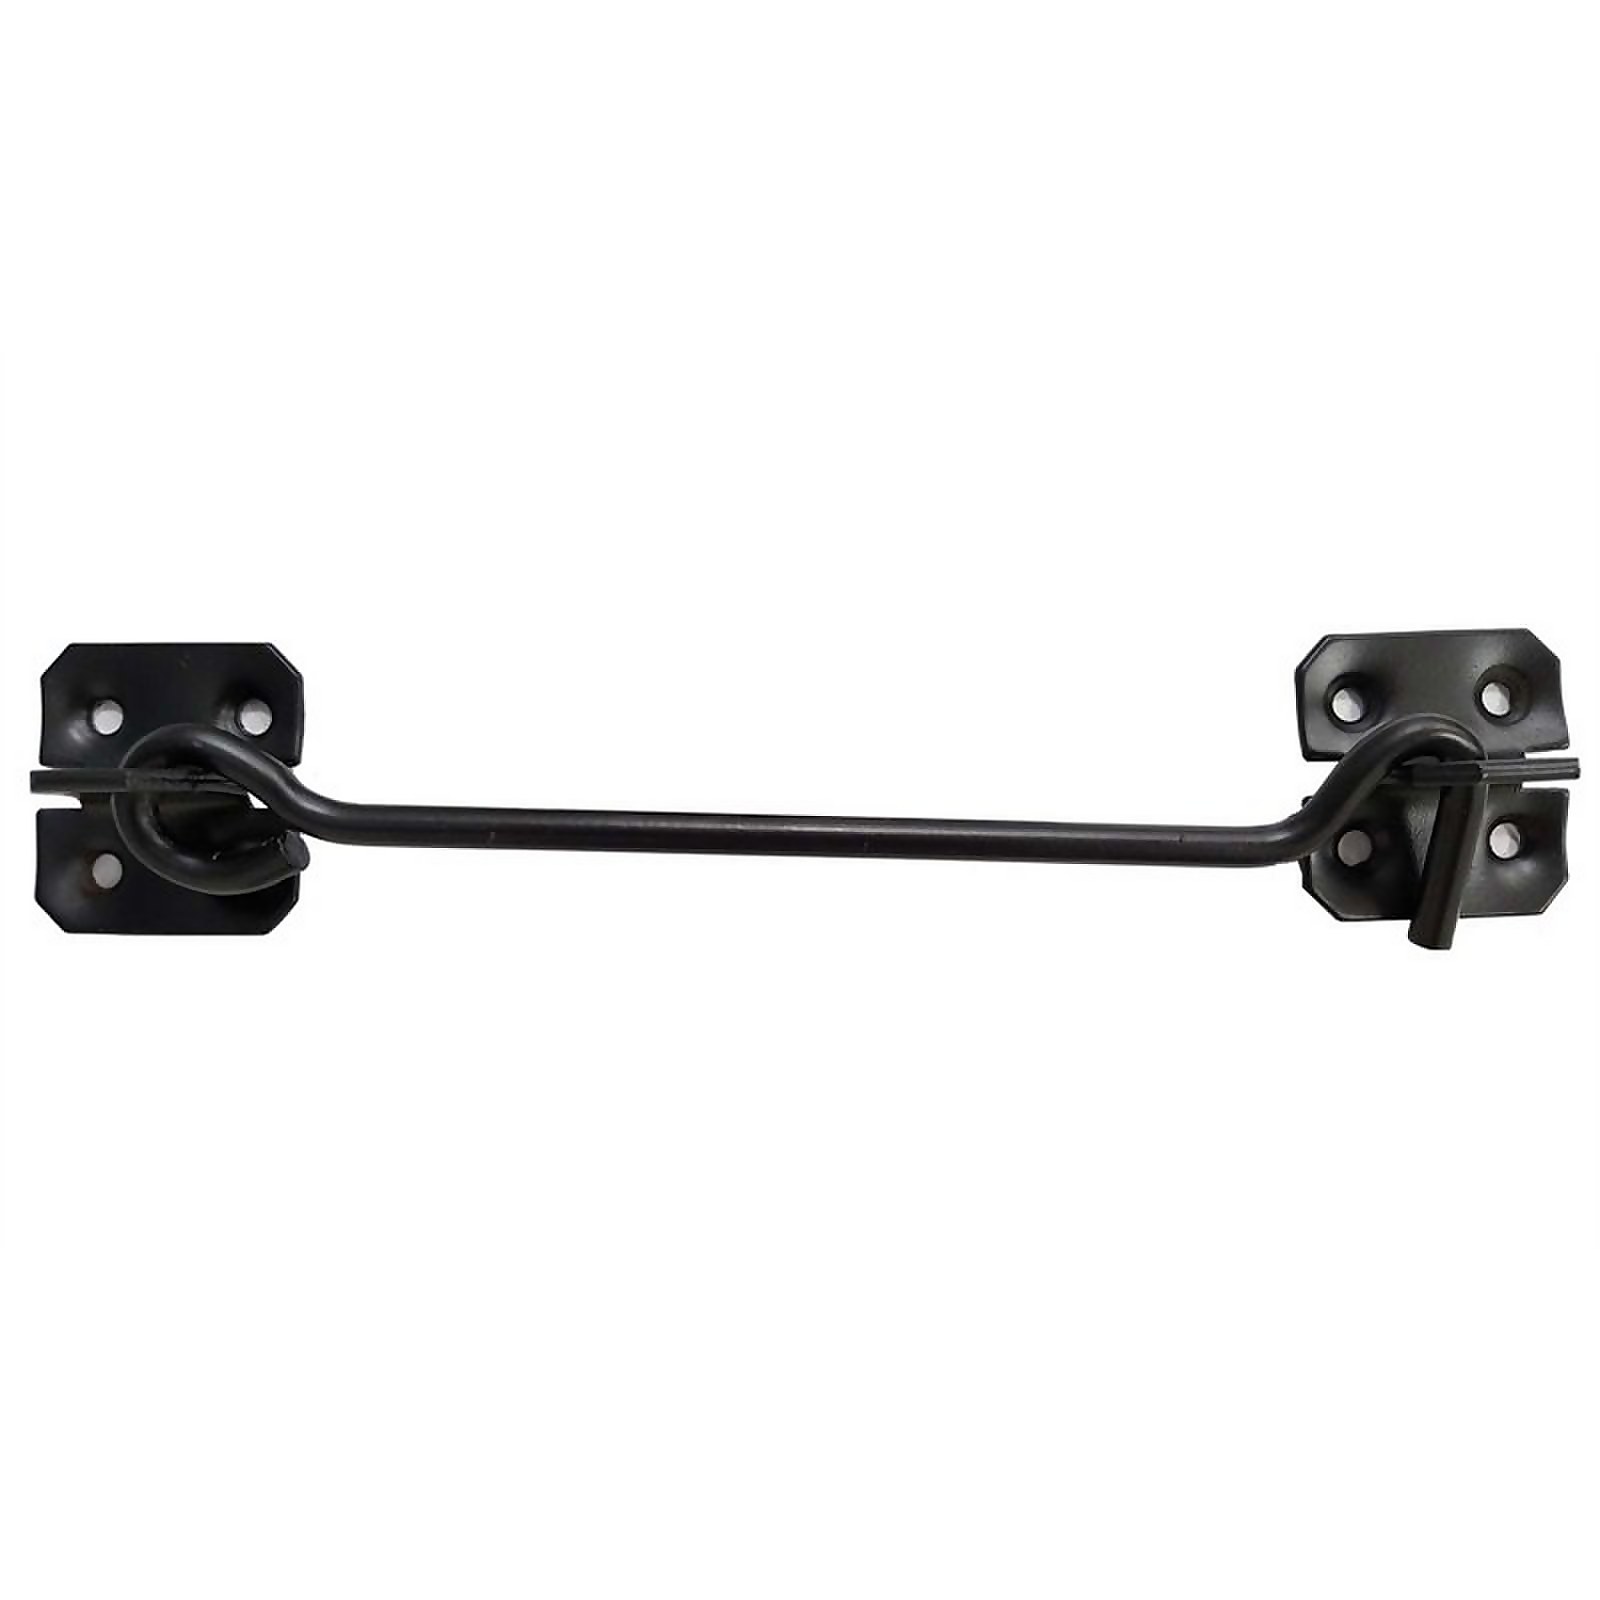 Photo of Wire Cabin Hook - Black - 203mm